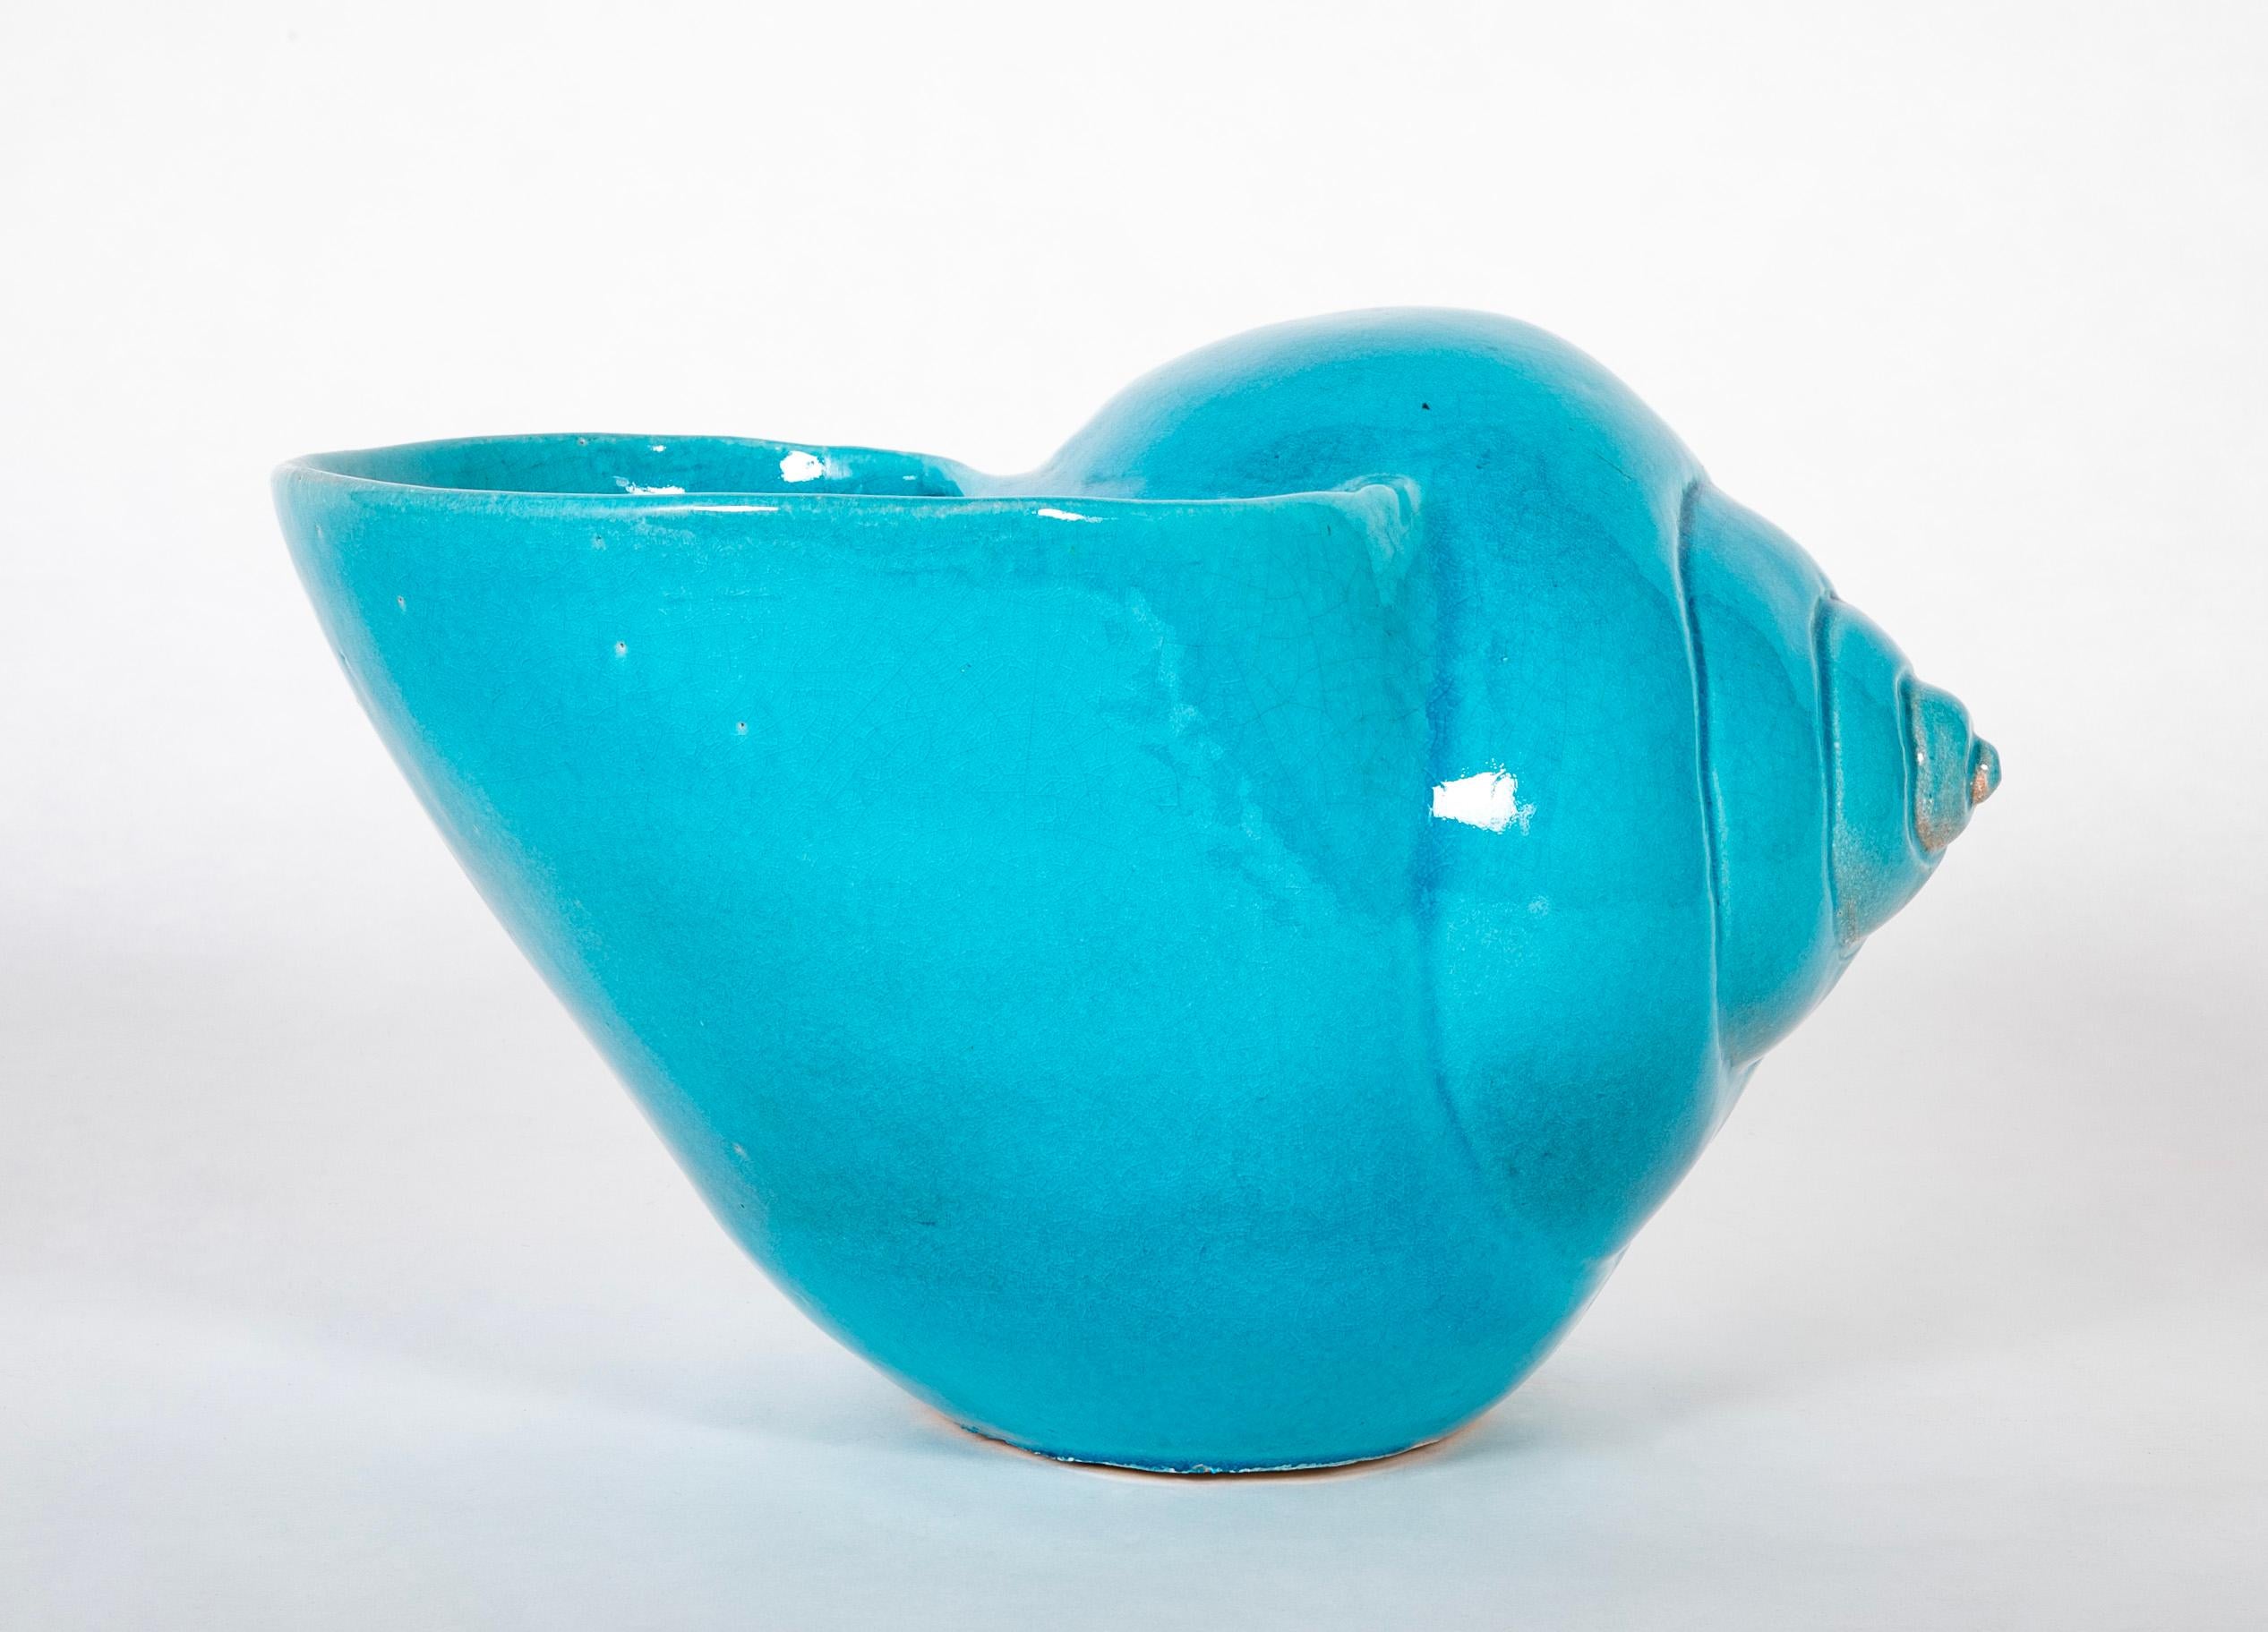 Turquoise Blue Glazed Sea Shell Vase Jardiniere Planter, Large Scale For Sale 5